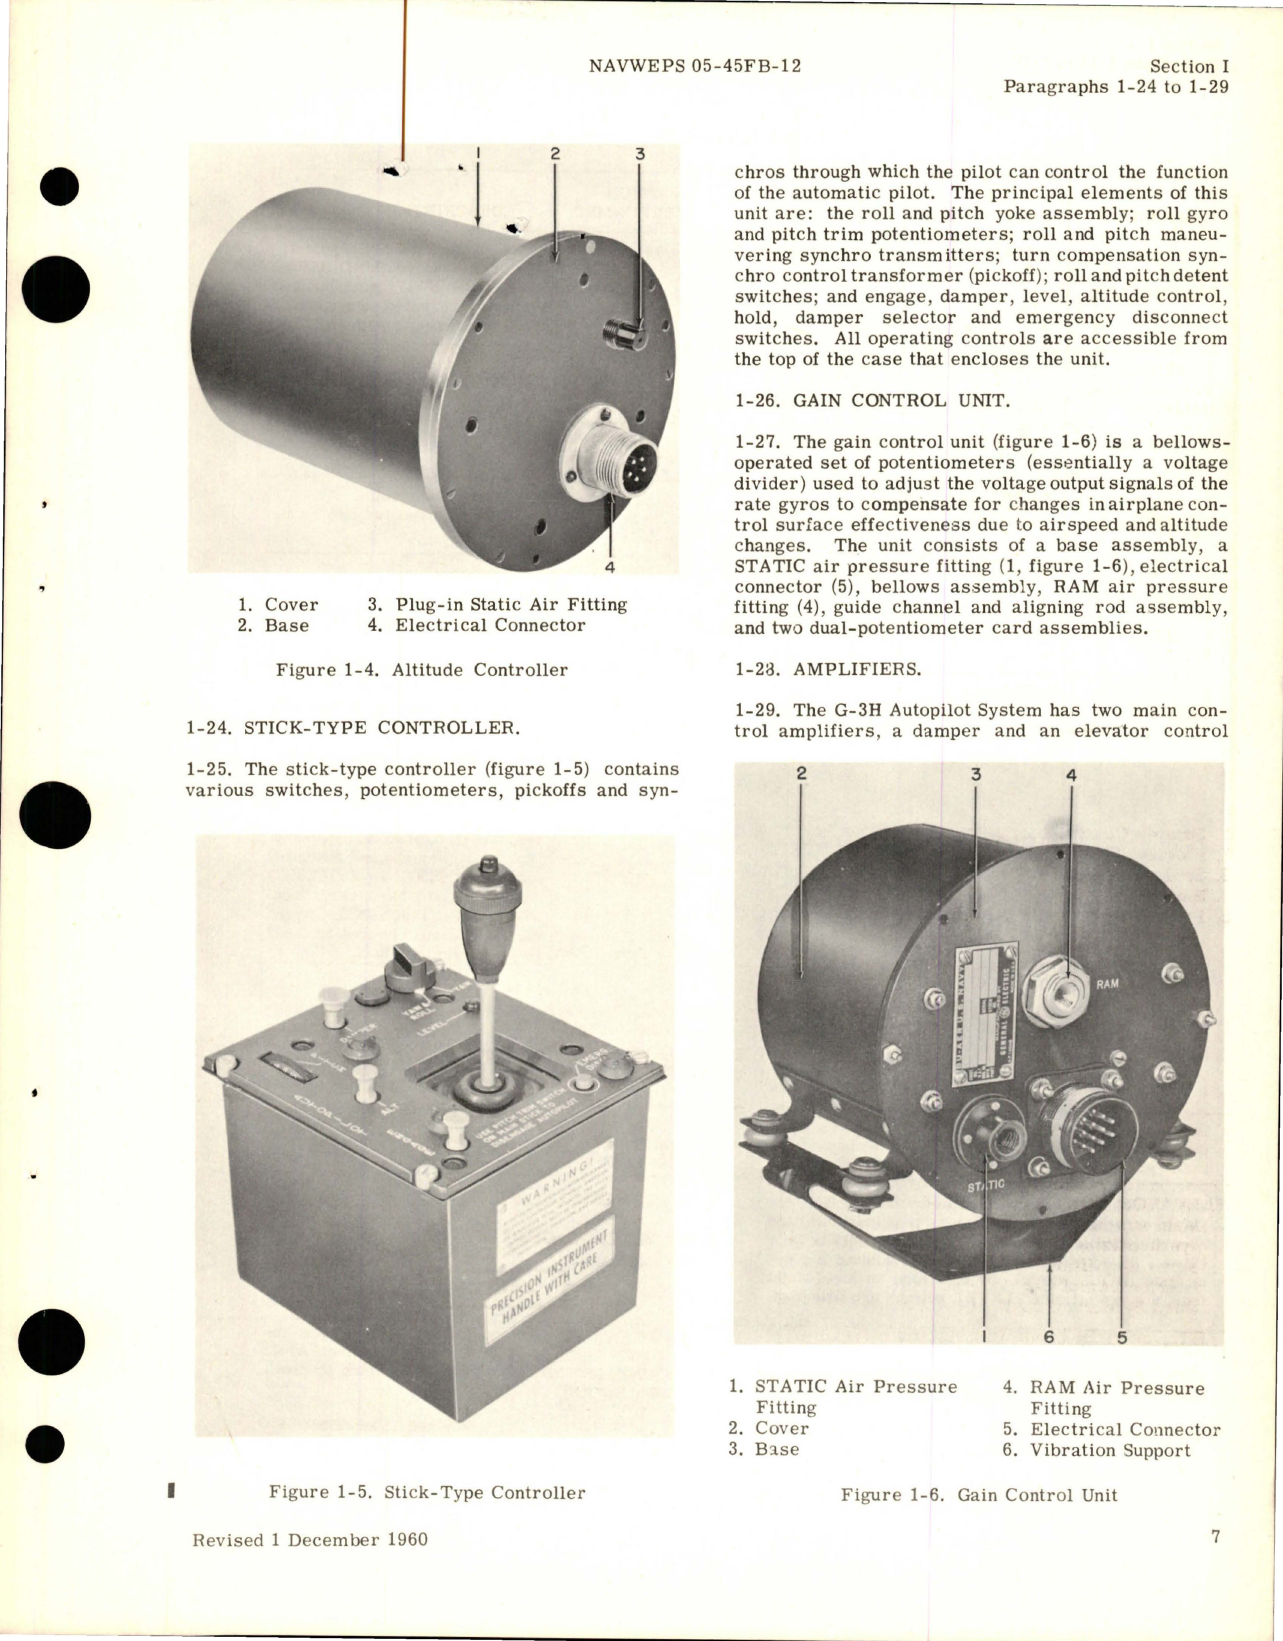 Sample page 7 from AirCorps Library document: Operation and Service Instructions for G-3H Automatic Pilot - Model 2CJ4D1